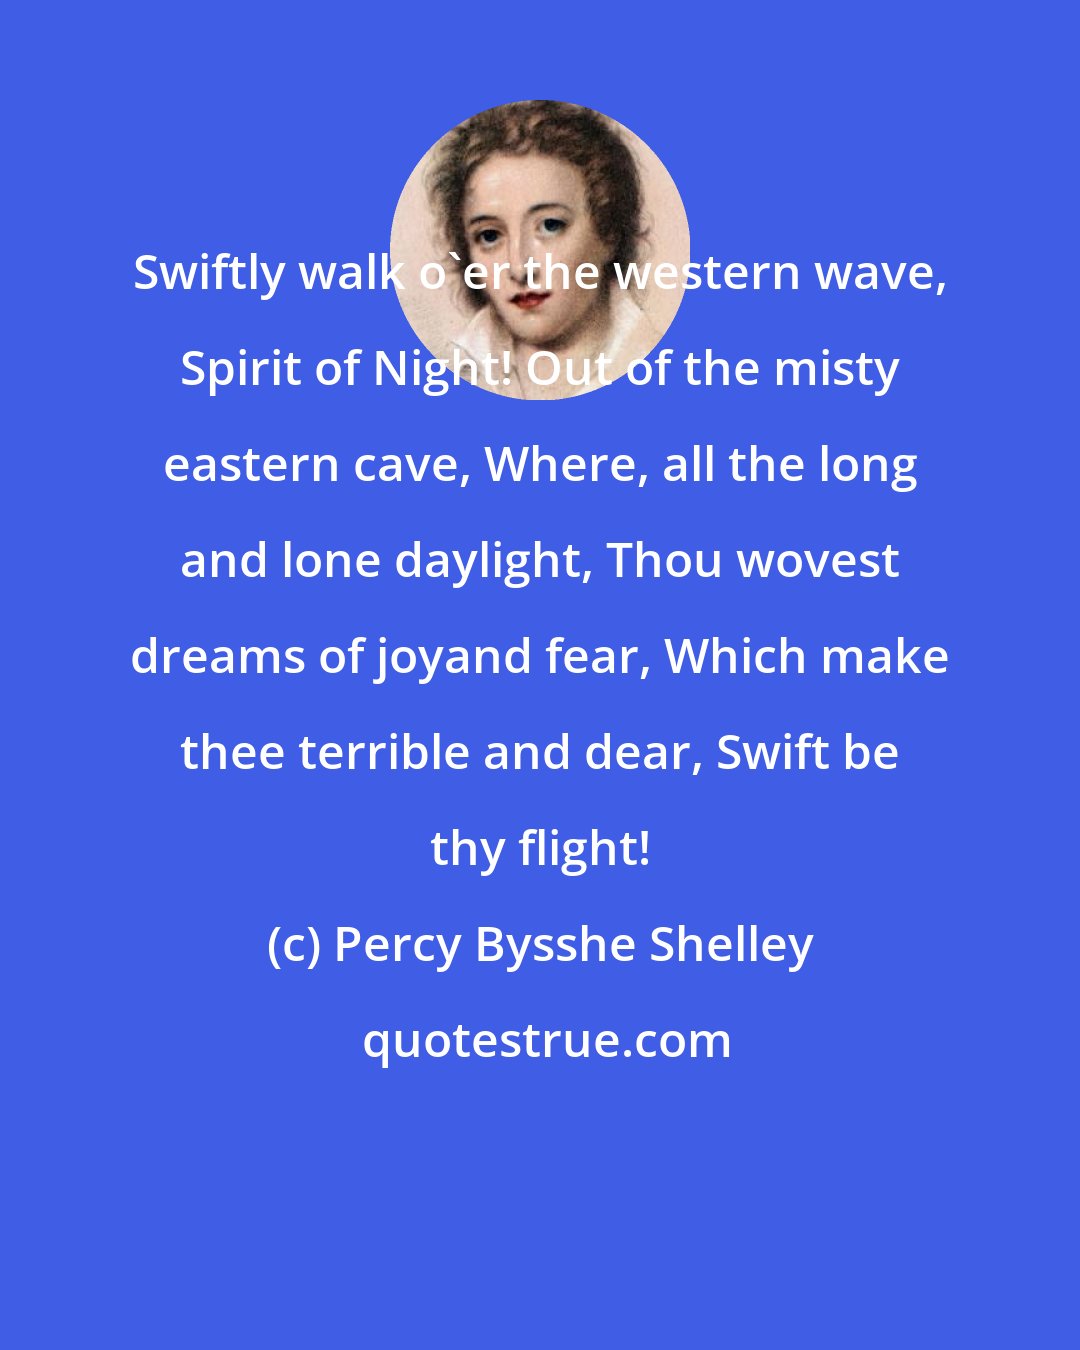 Percy Bysshe Shelley: Swiftly walk o'er the western wave, Spirit of Night! Out of the misty eastern cave, Where, all the long and lone daylight, Thou wovest dreams of joyand fear, Which make thee terrible and dear, Swift be thy flight!